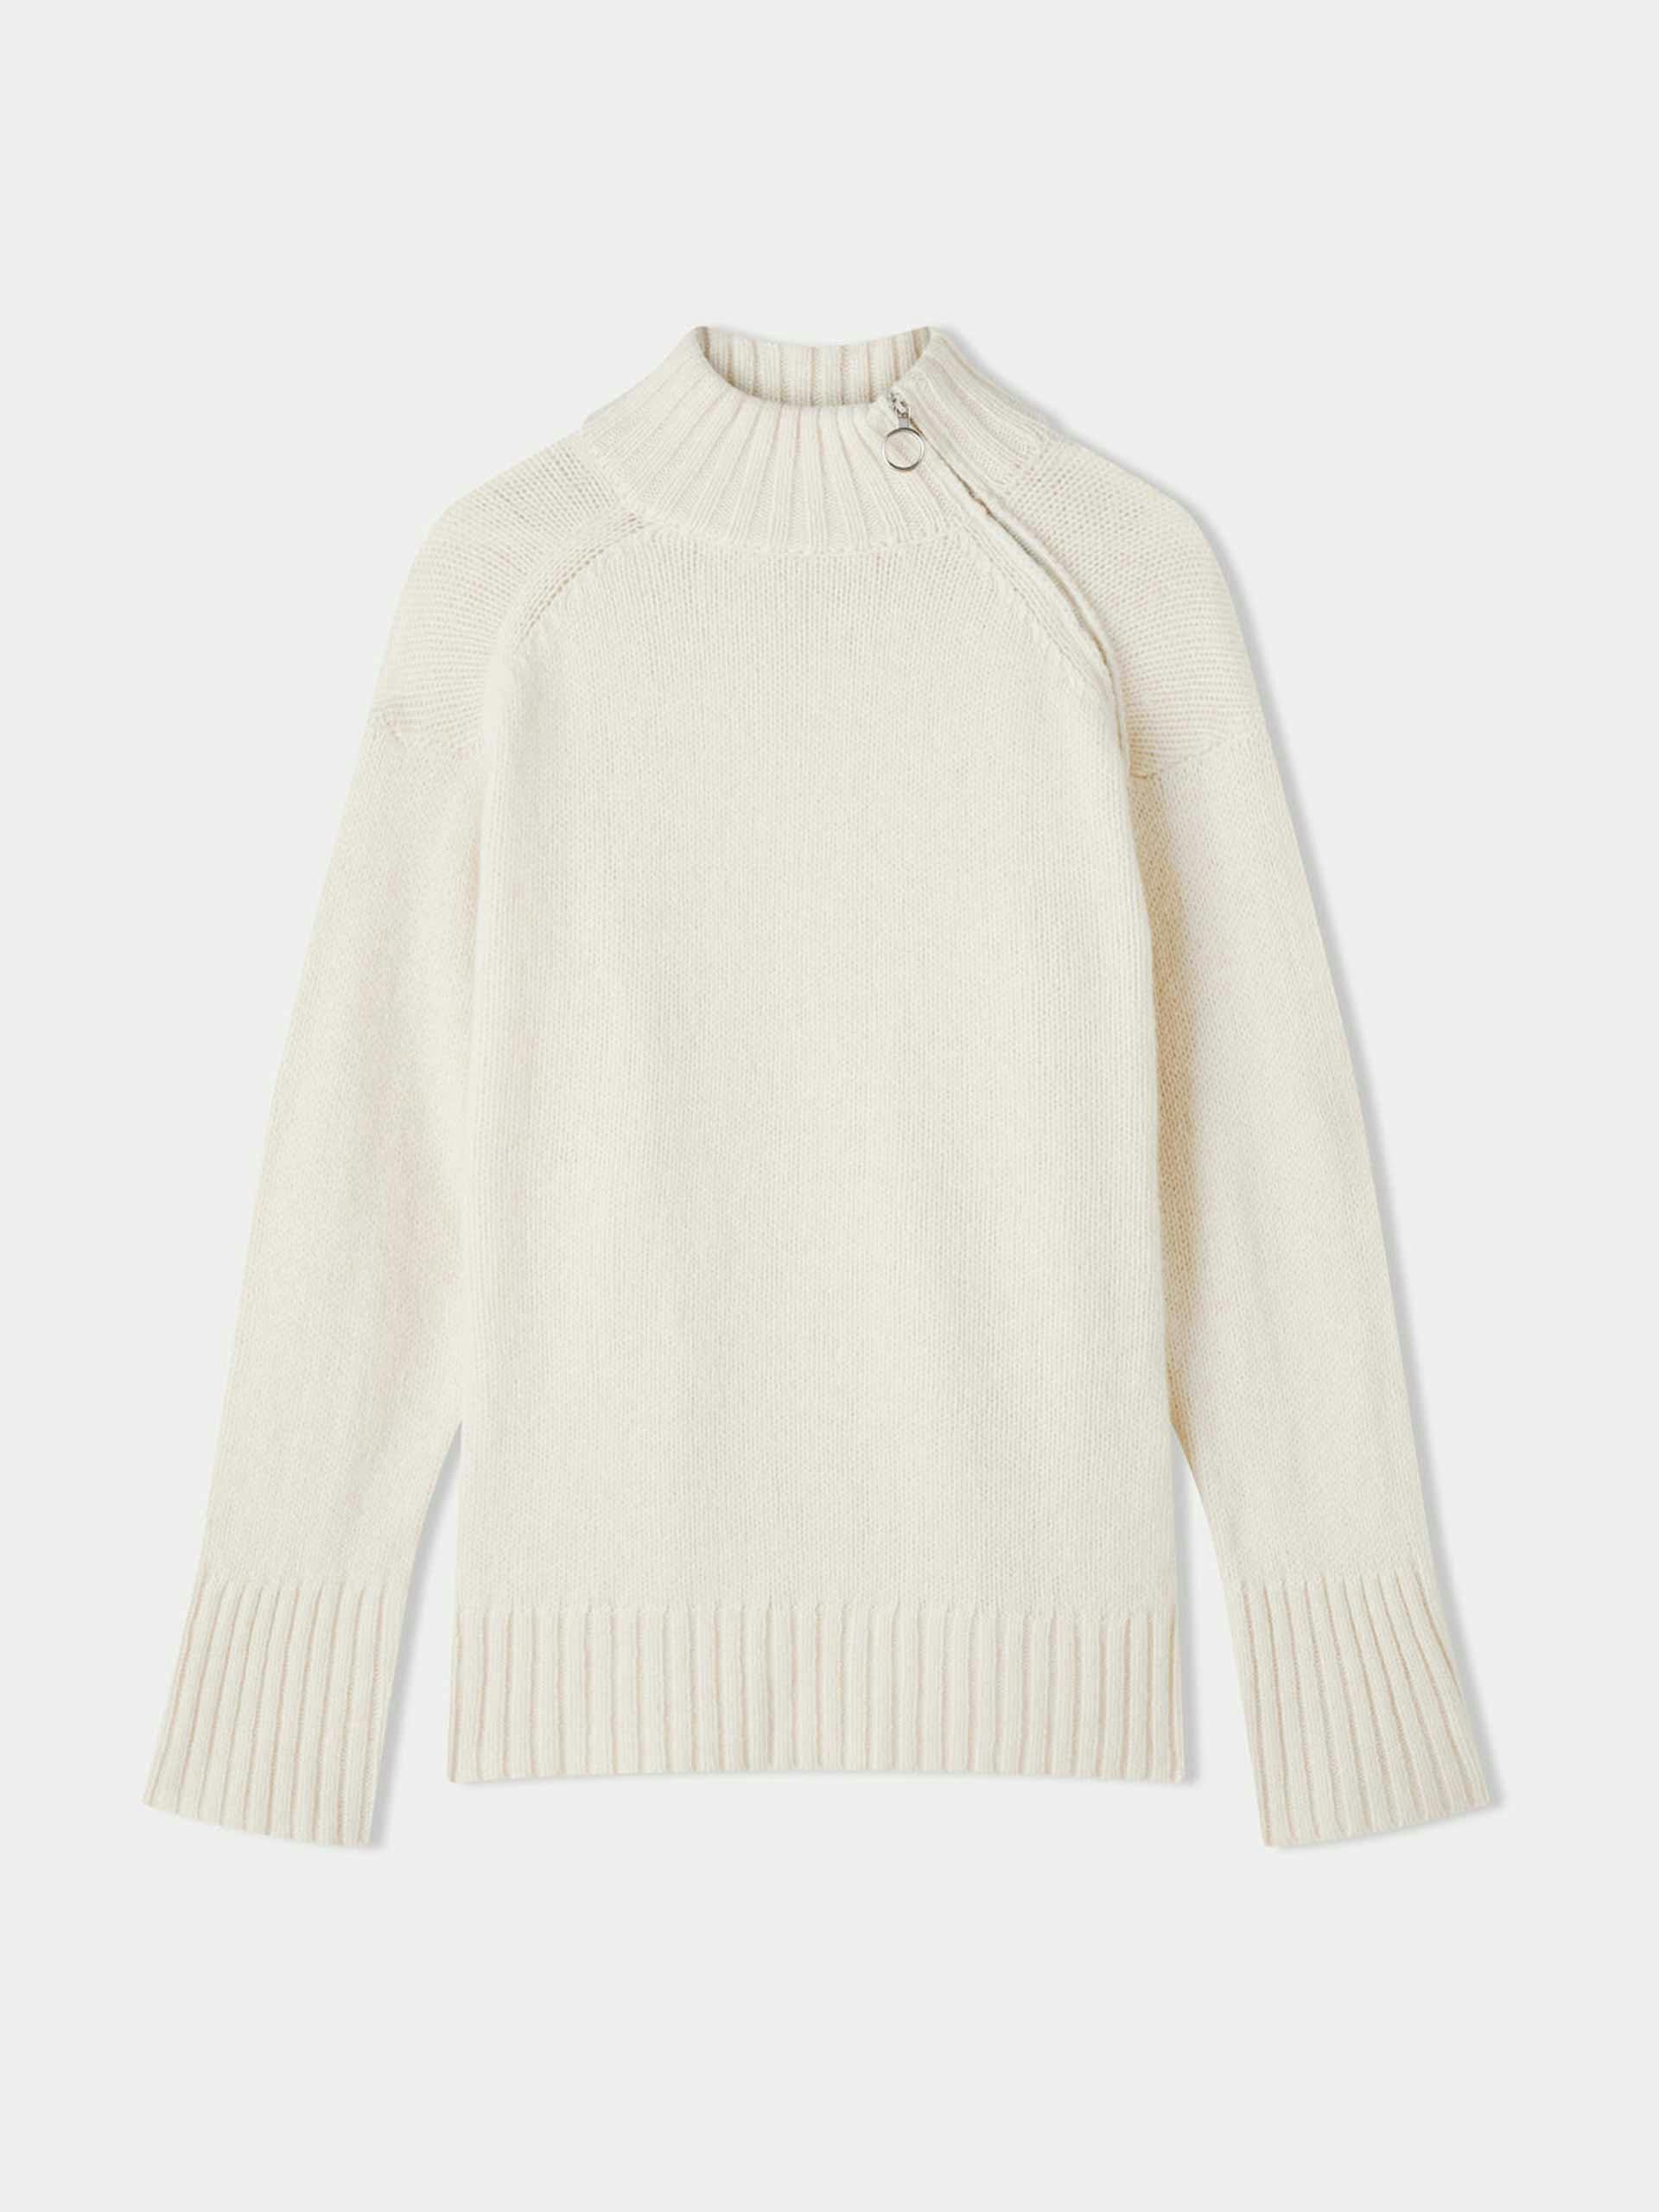 Chunky knitted jumper with a zip